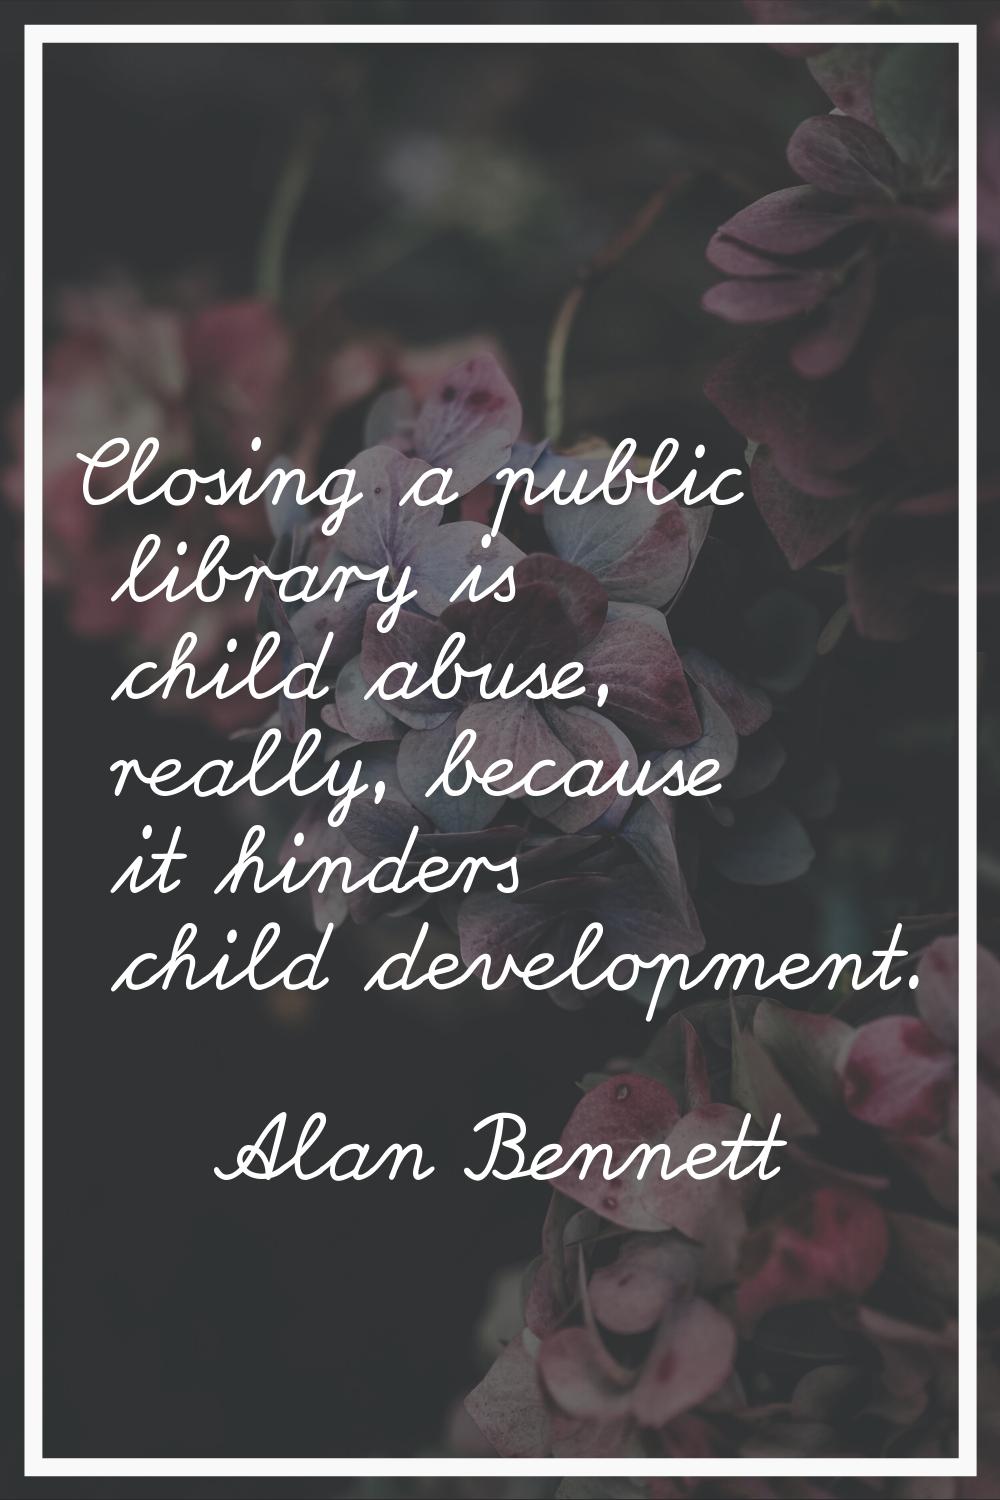 Closing a public library is child abuse, really, because it hinders child development.